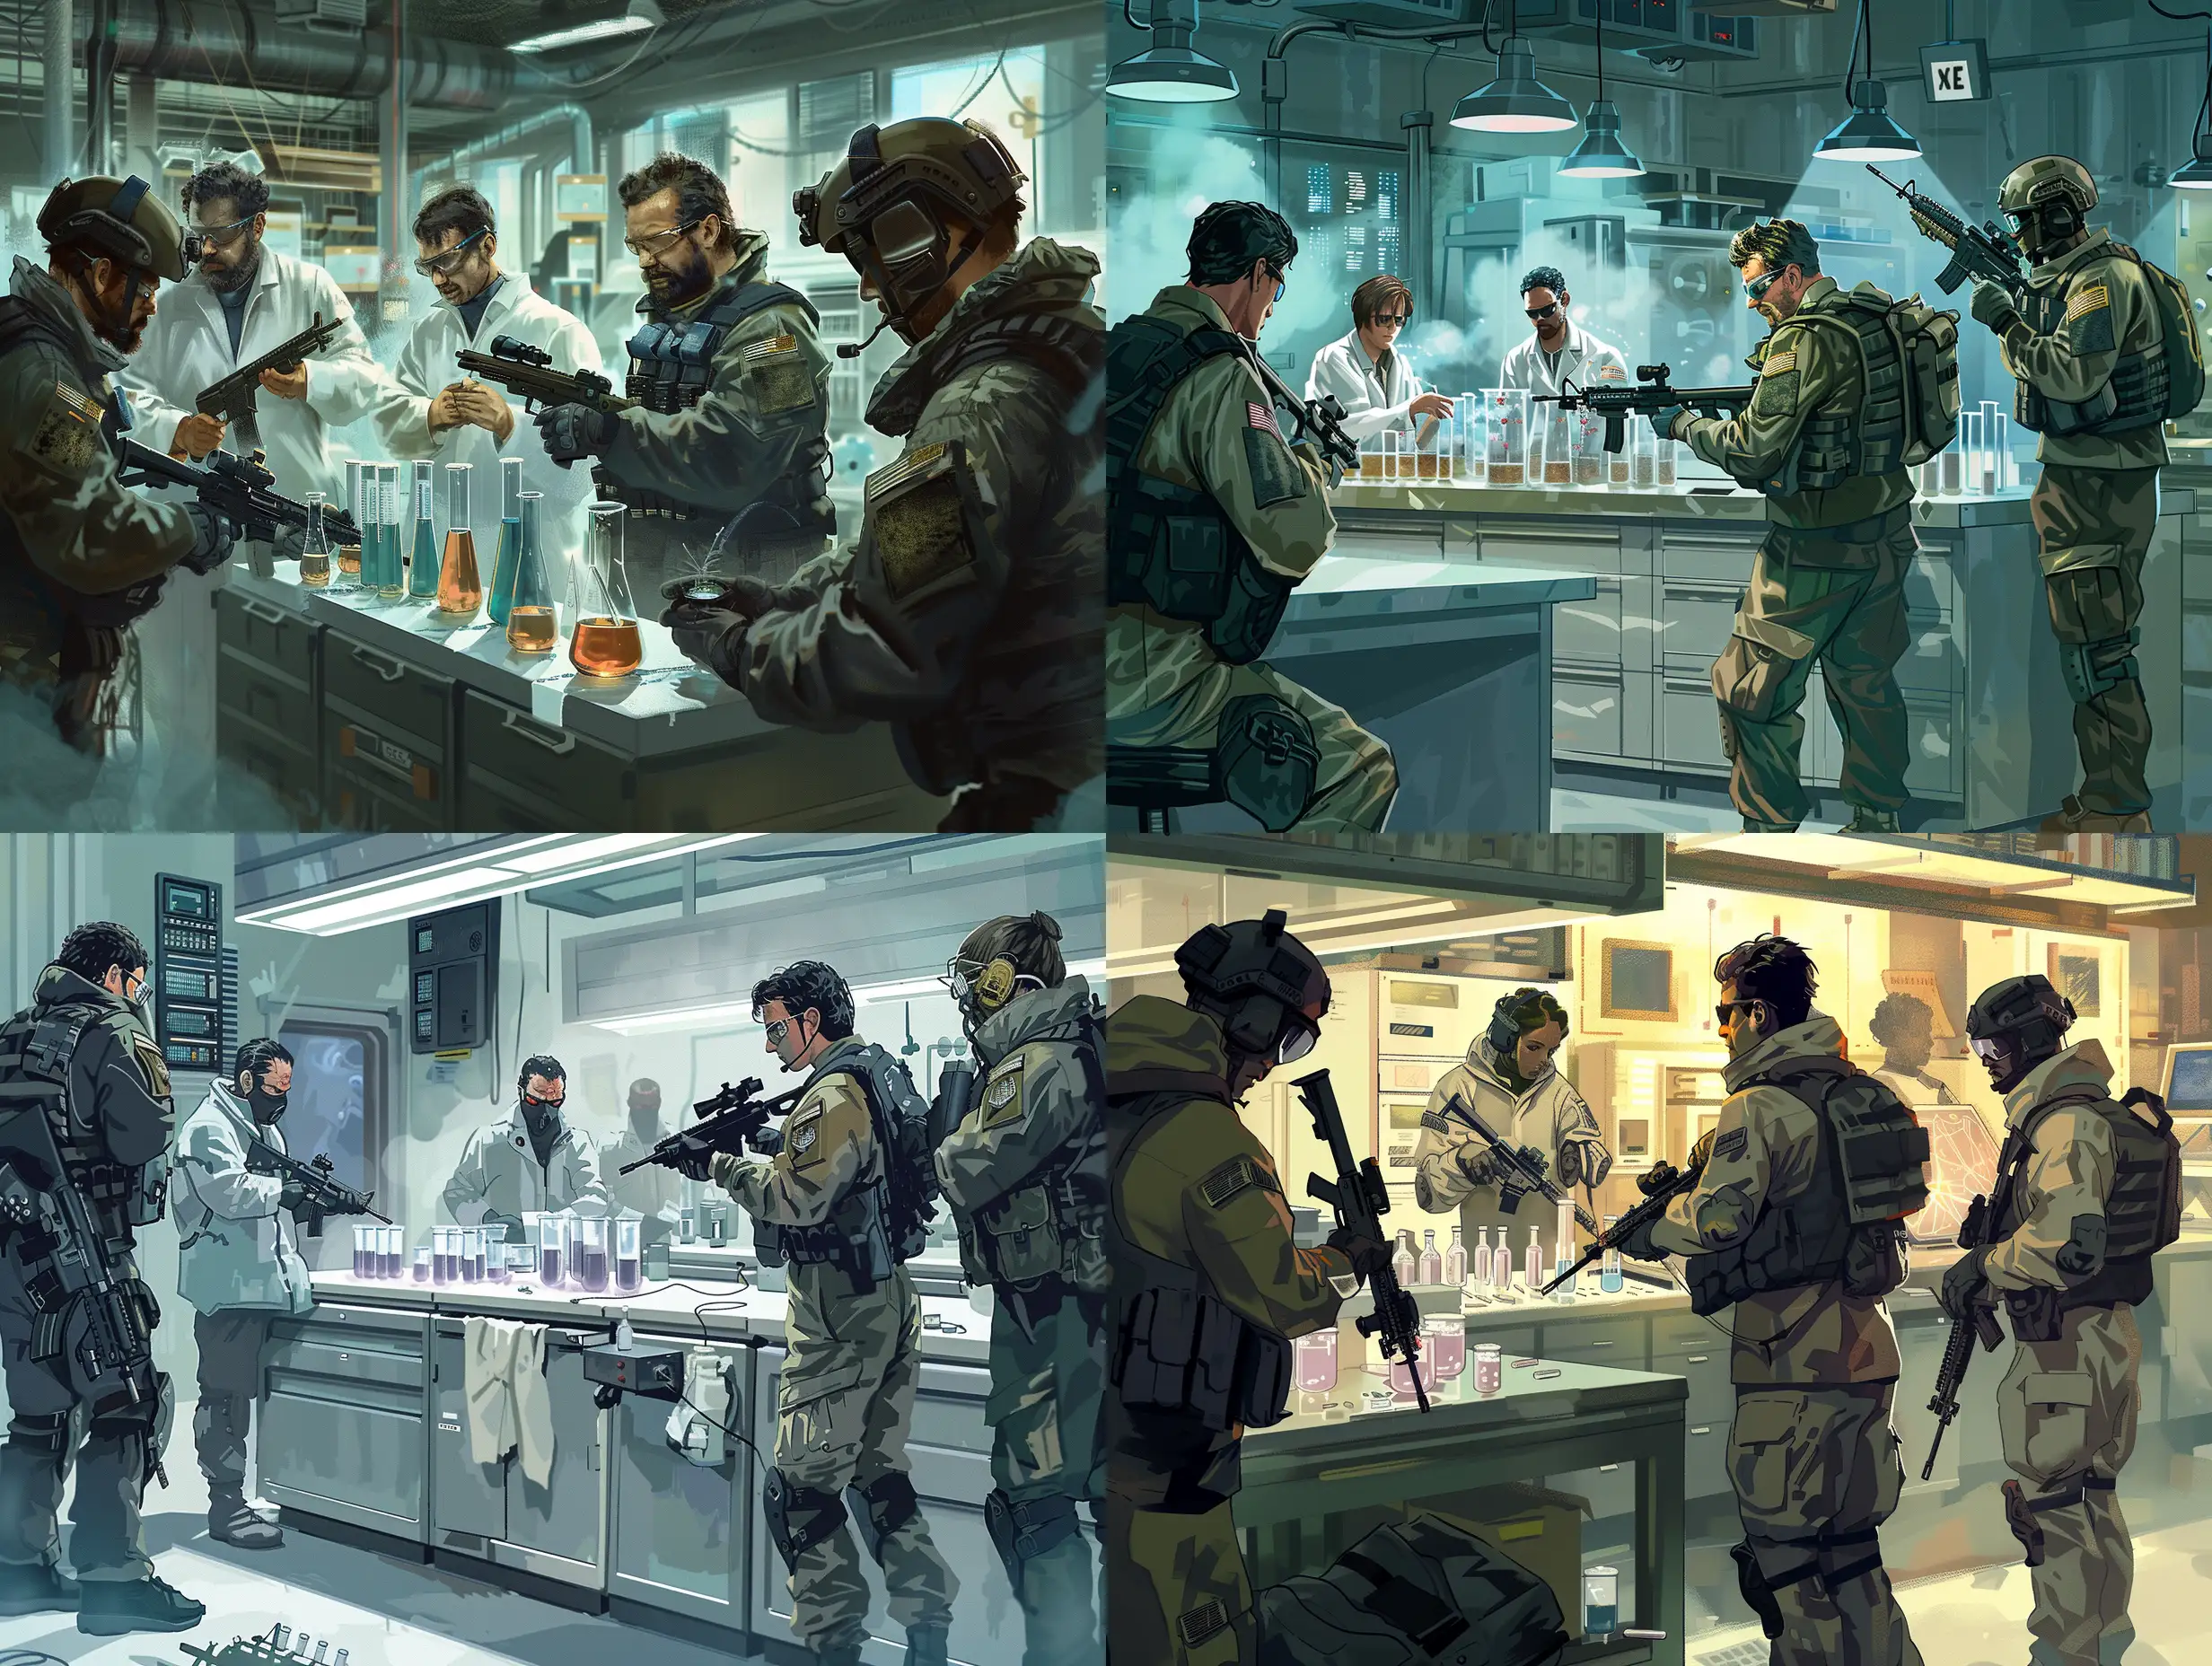 Scientific-Experimentation-Under-Surveillance-Laboratory-Scientists-and-Guarded-Soldiers